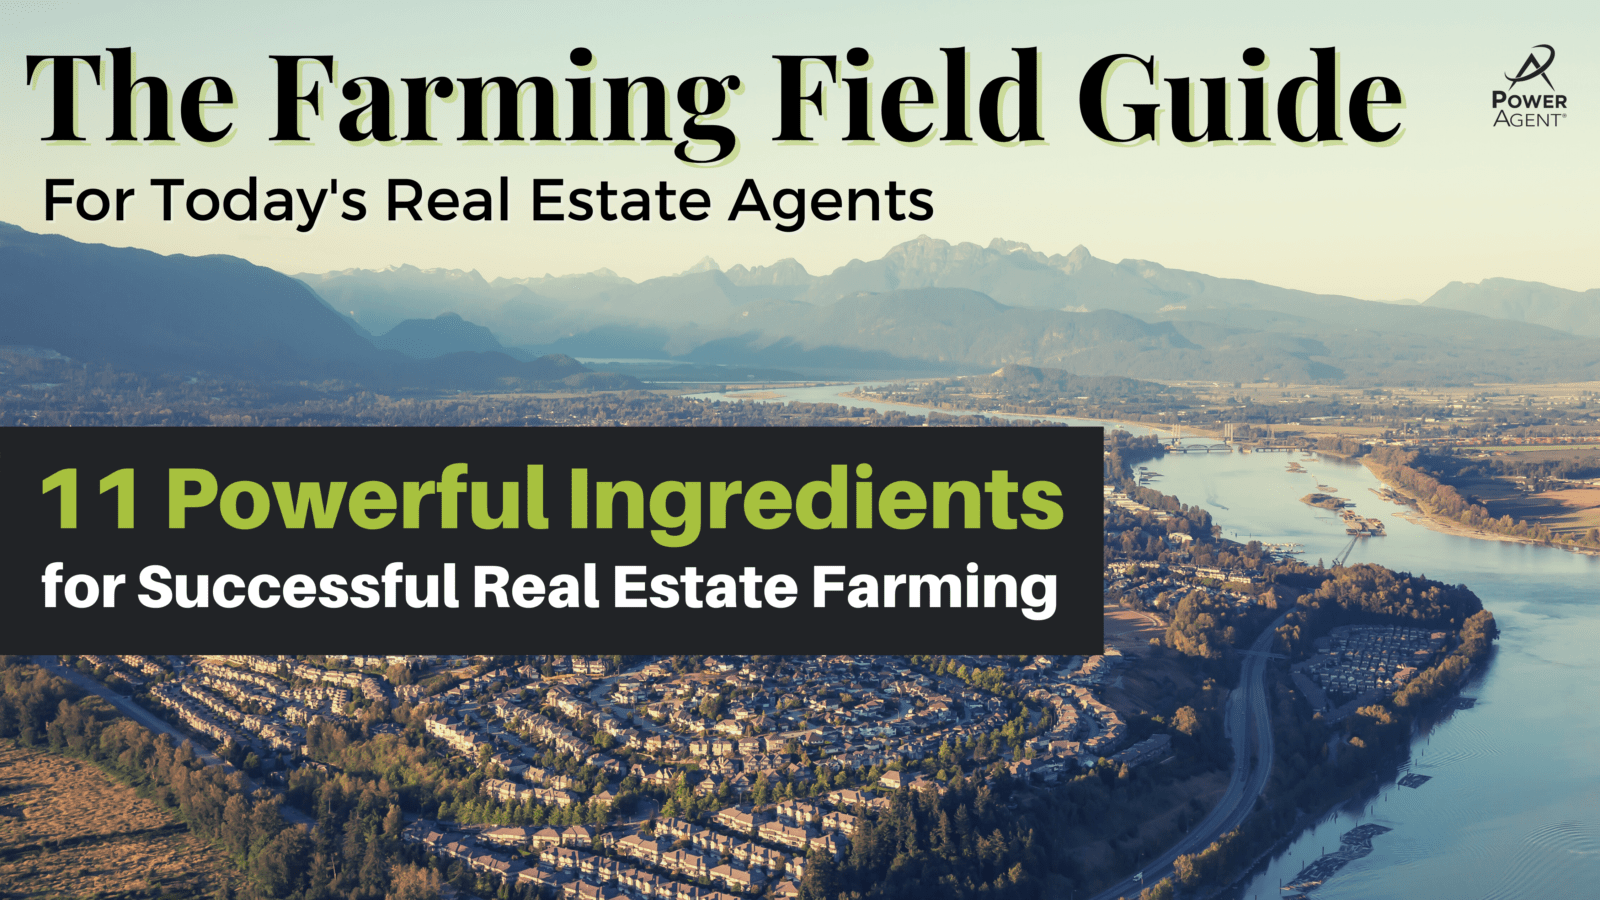 the front cover of The Farming Field Guide for Todays Real Estate Agents